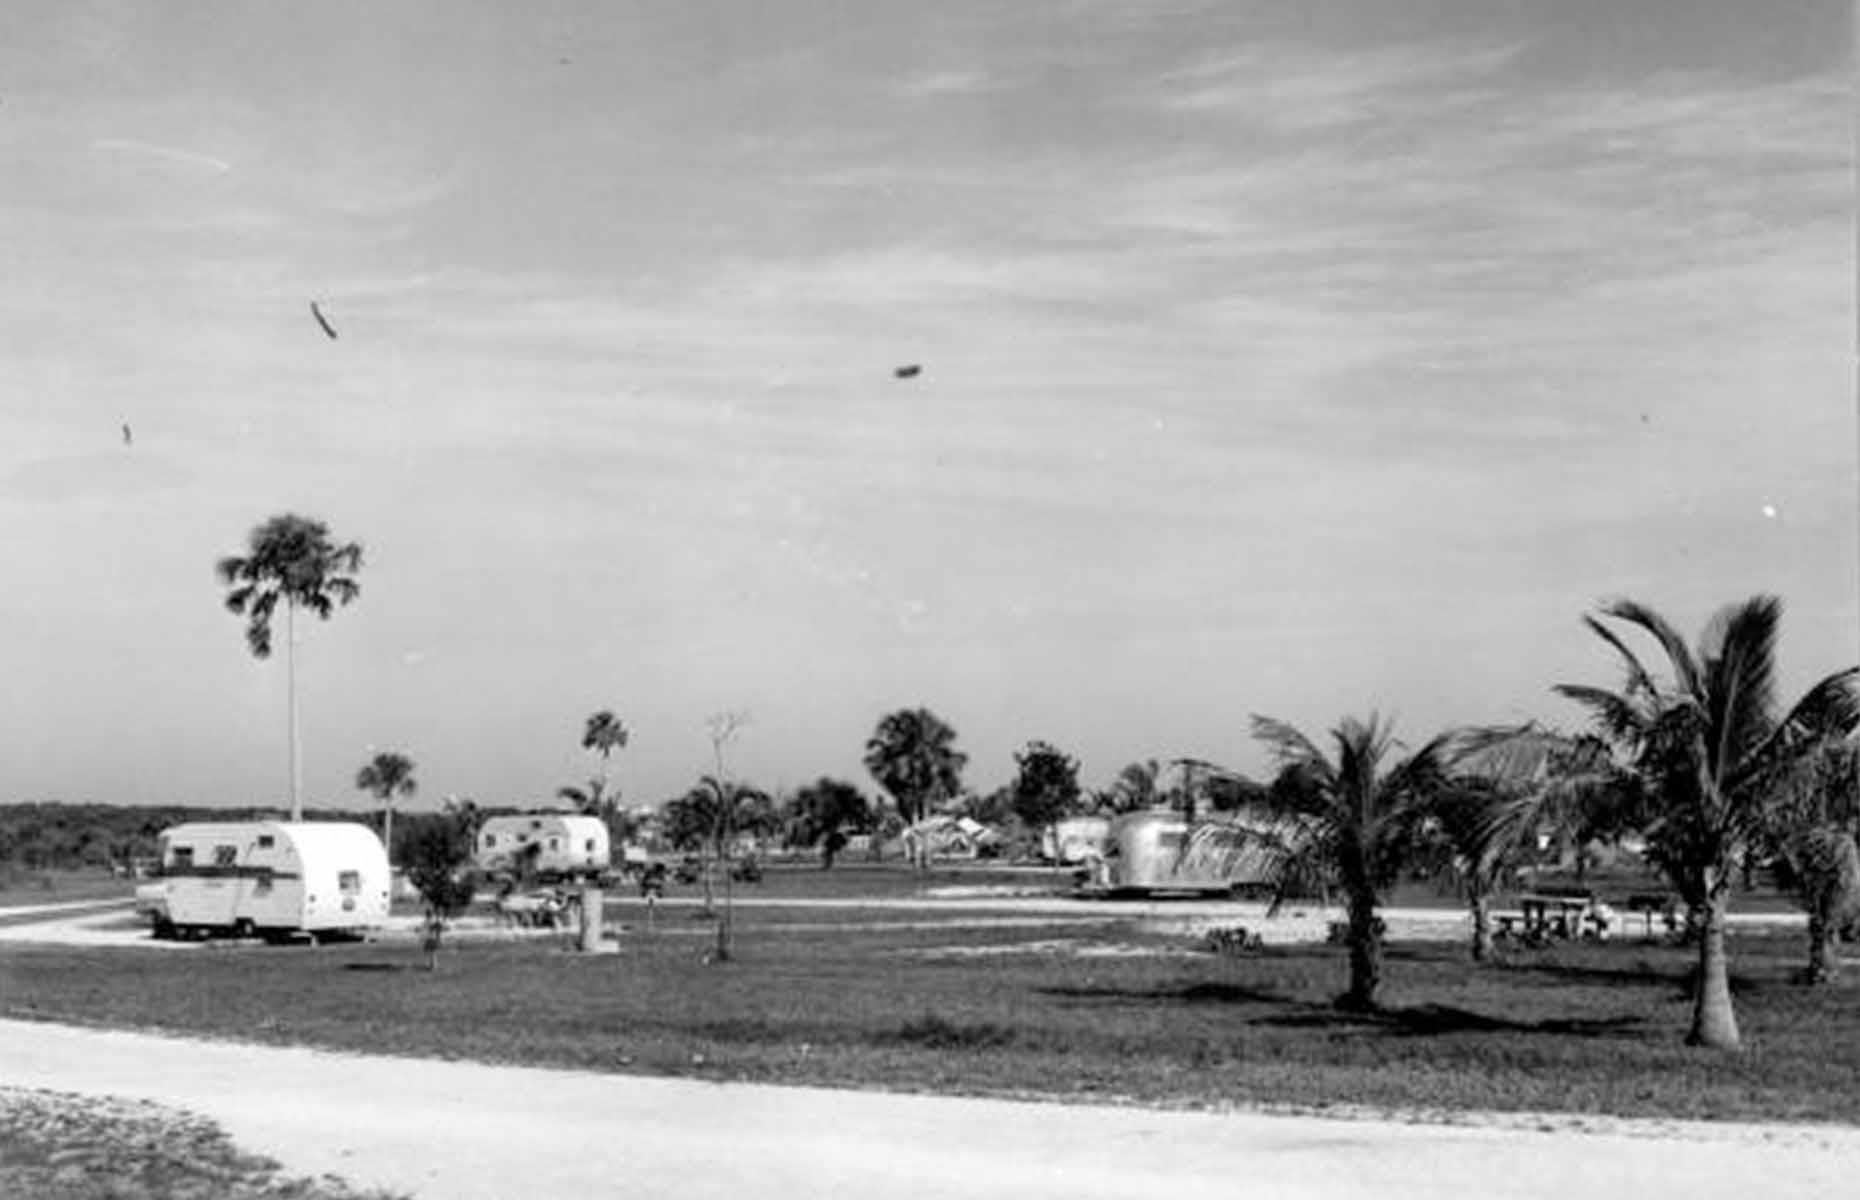 RV campgrounds were now ubiquitous across America, although most parks only had a handful of full hook-up sites. This palm-studded park is filled with large RVs and airstream trailers, and could be found in the Flamingo area of Everglades National Park.